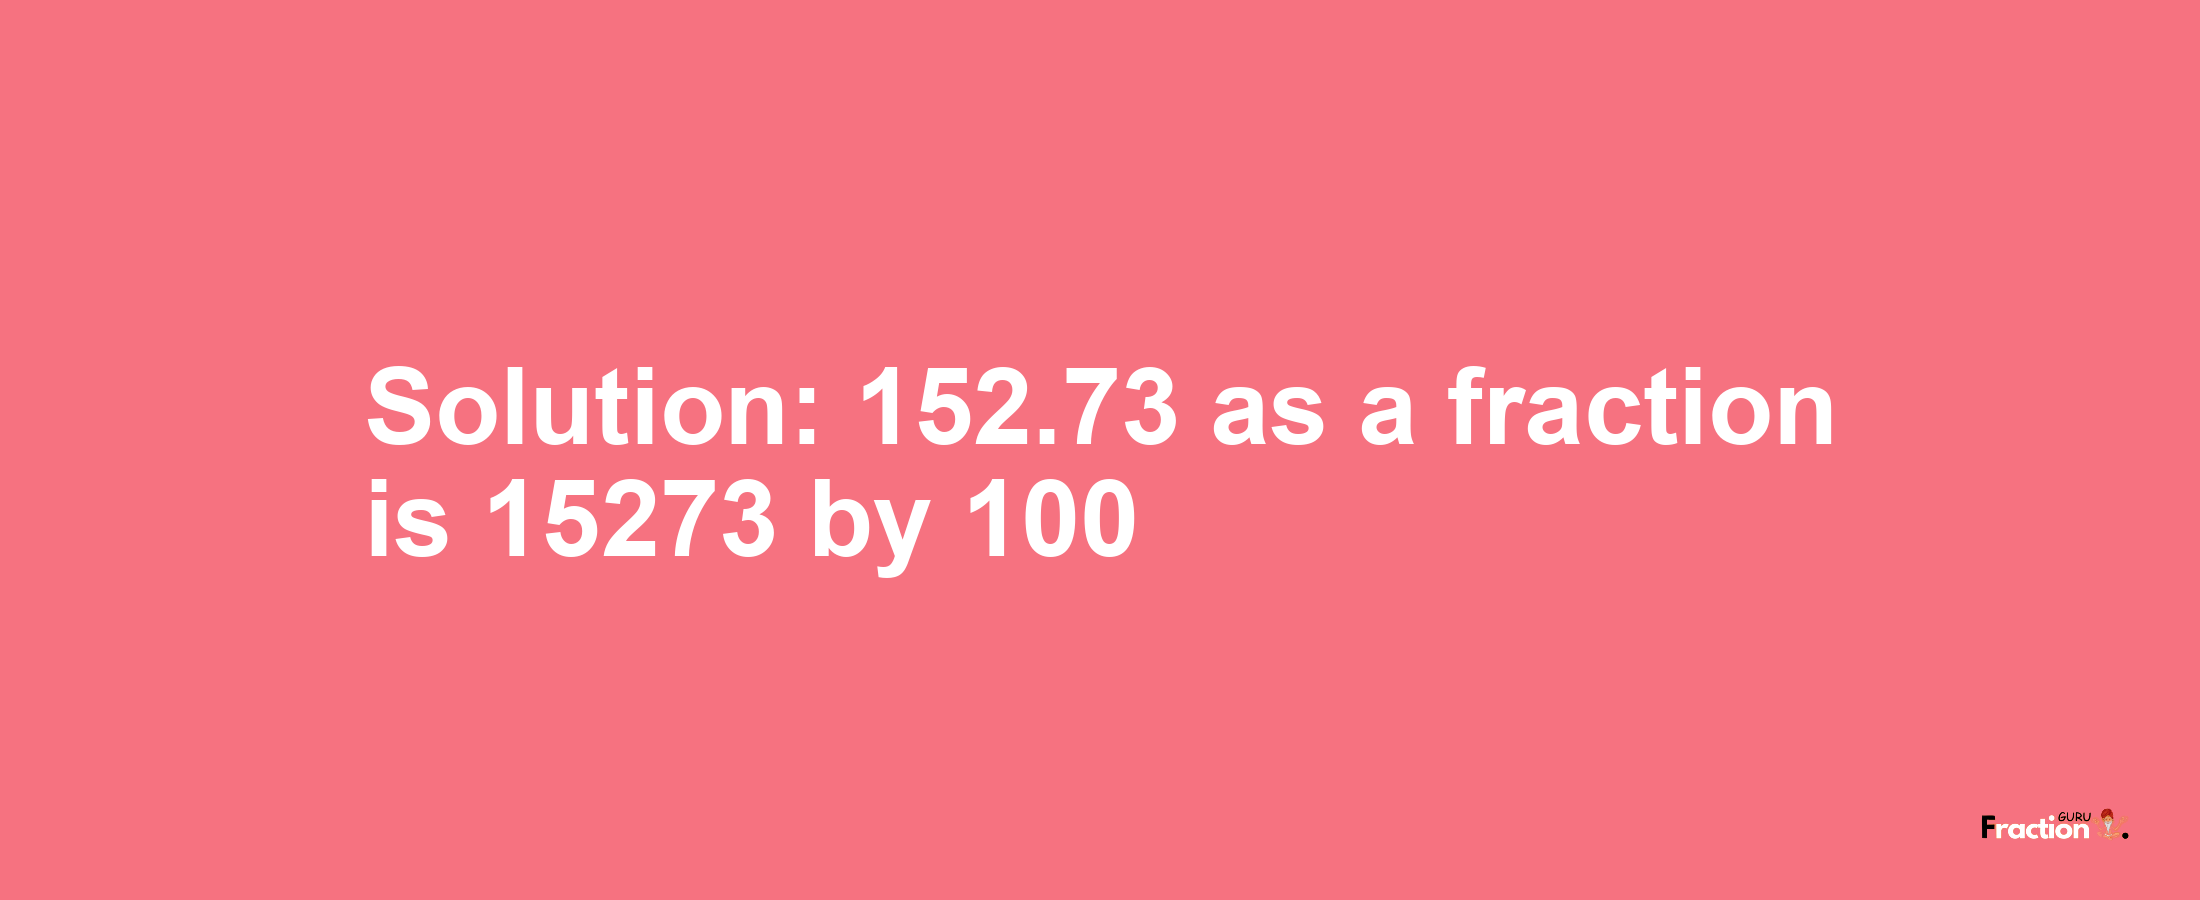 Solution:152.73 as a fraction is 15273/100